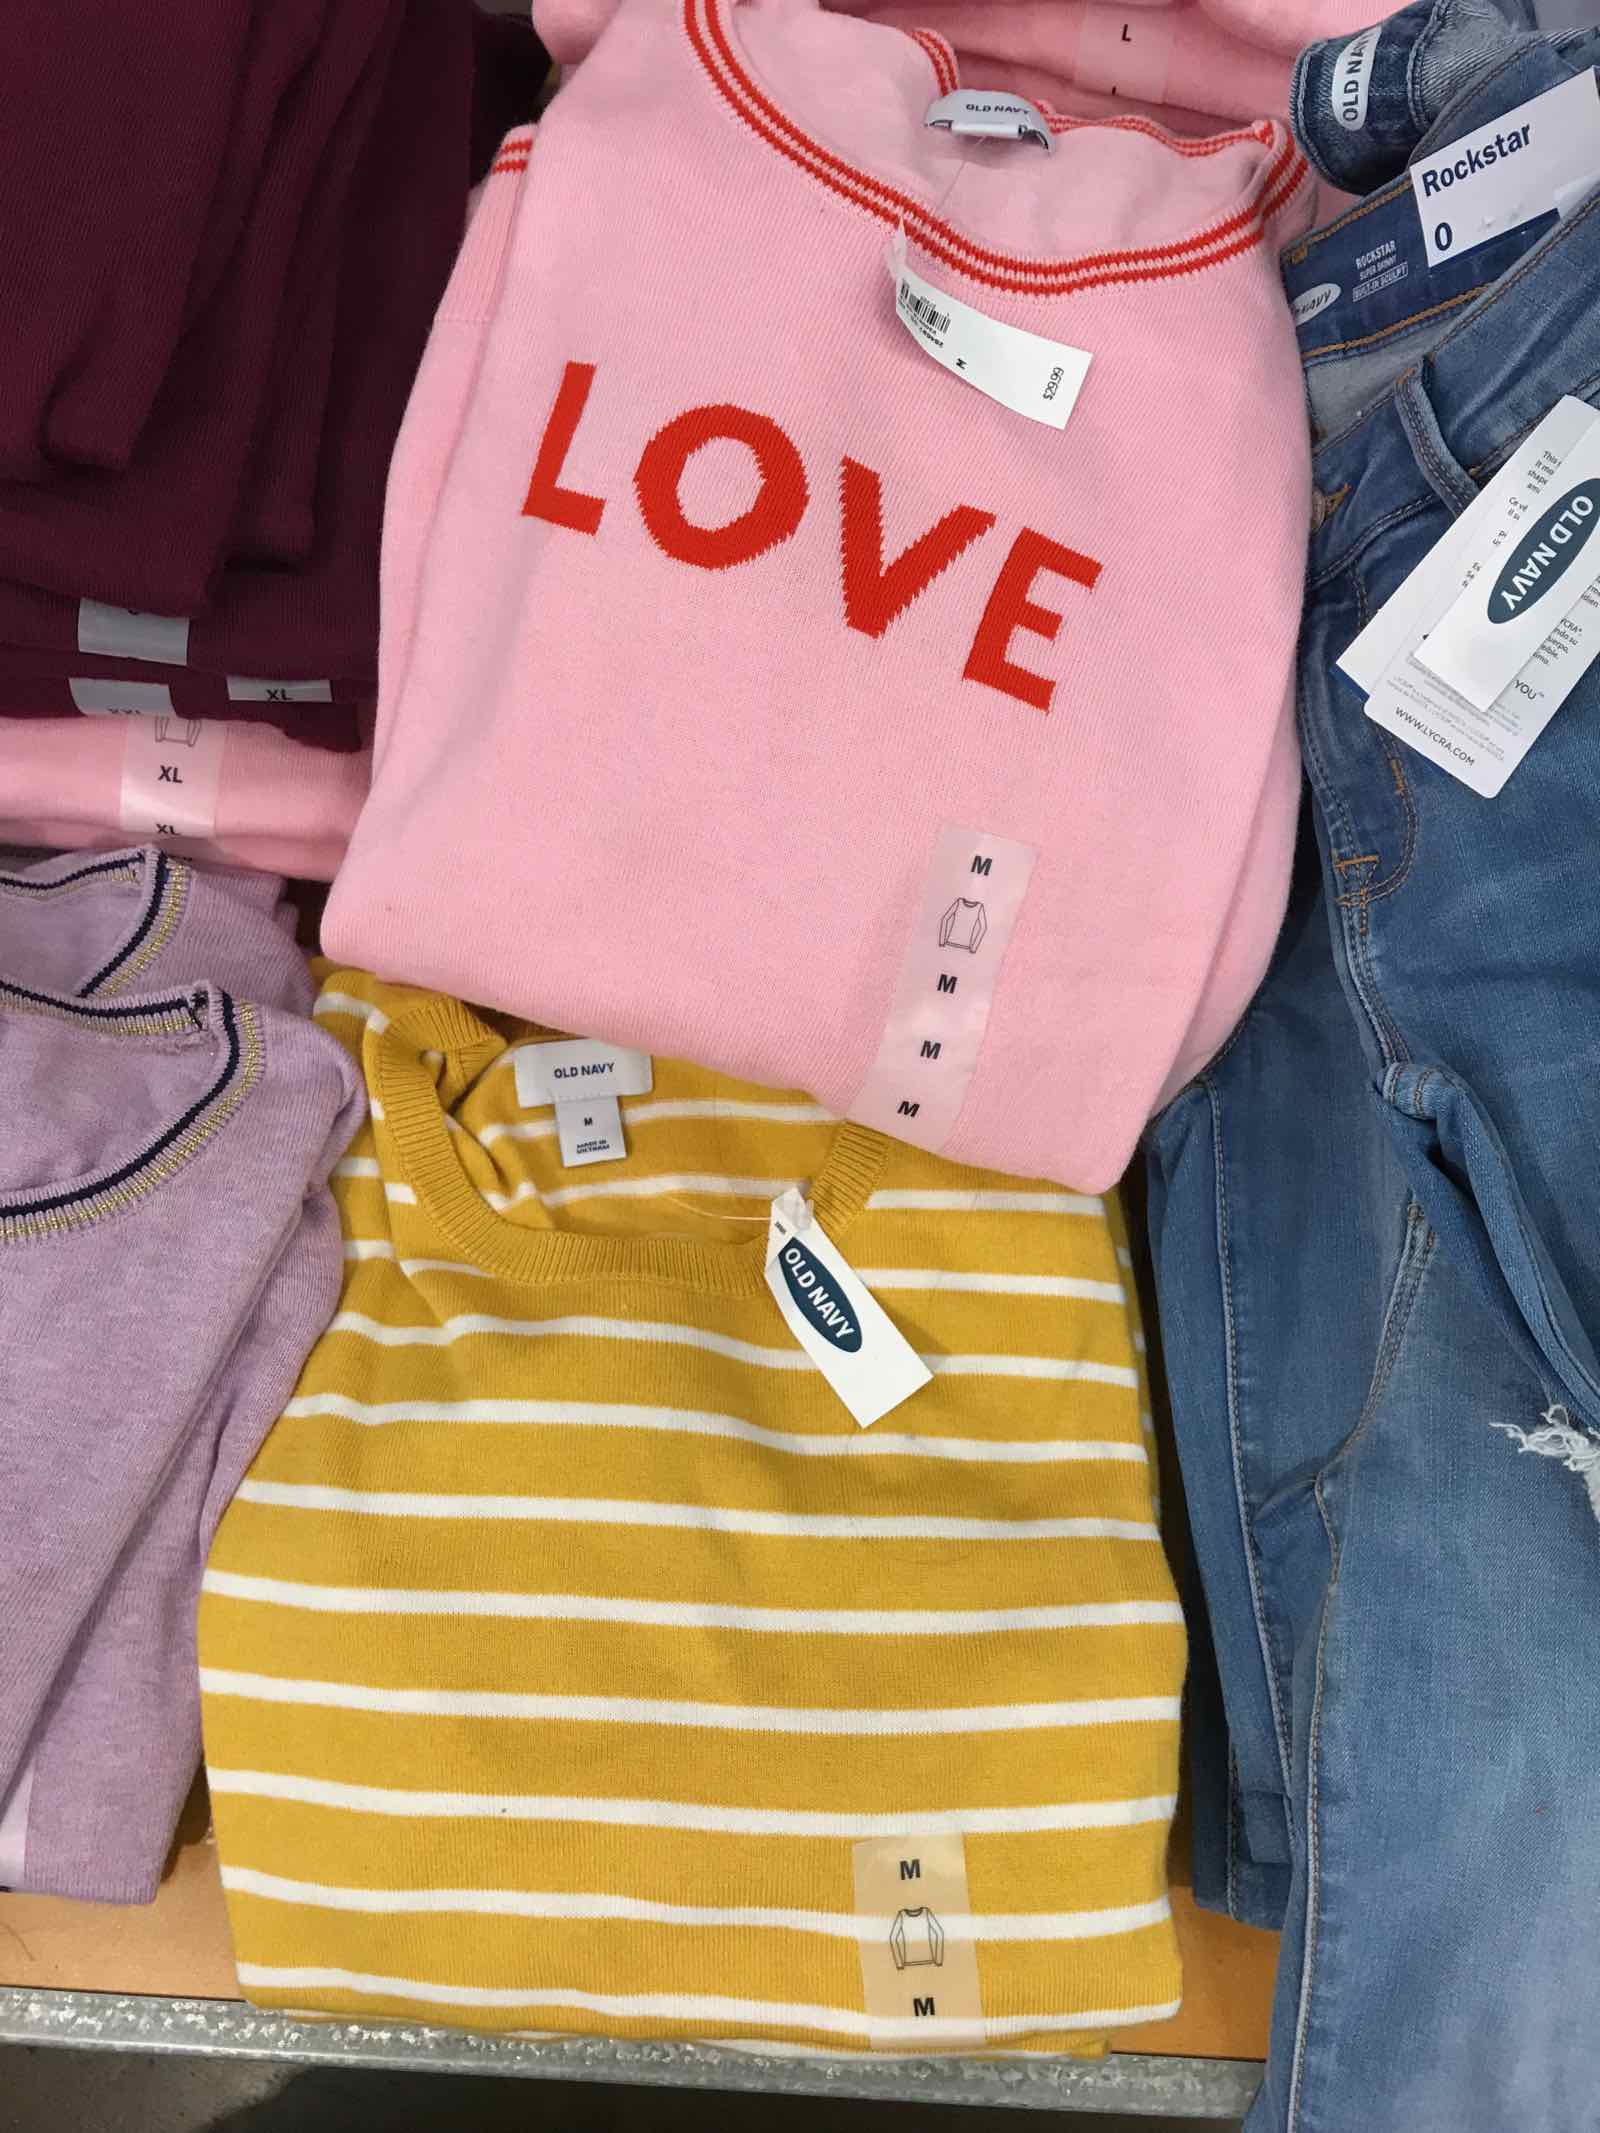 Off the Rack: Old Navy Friends & Family Sale Picks - The Budget Babe |  Affordable Fashion & Style Blog